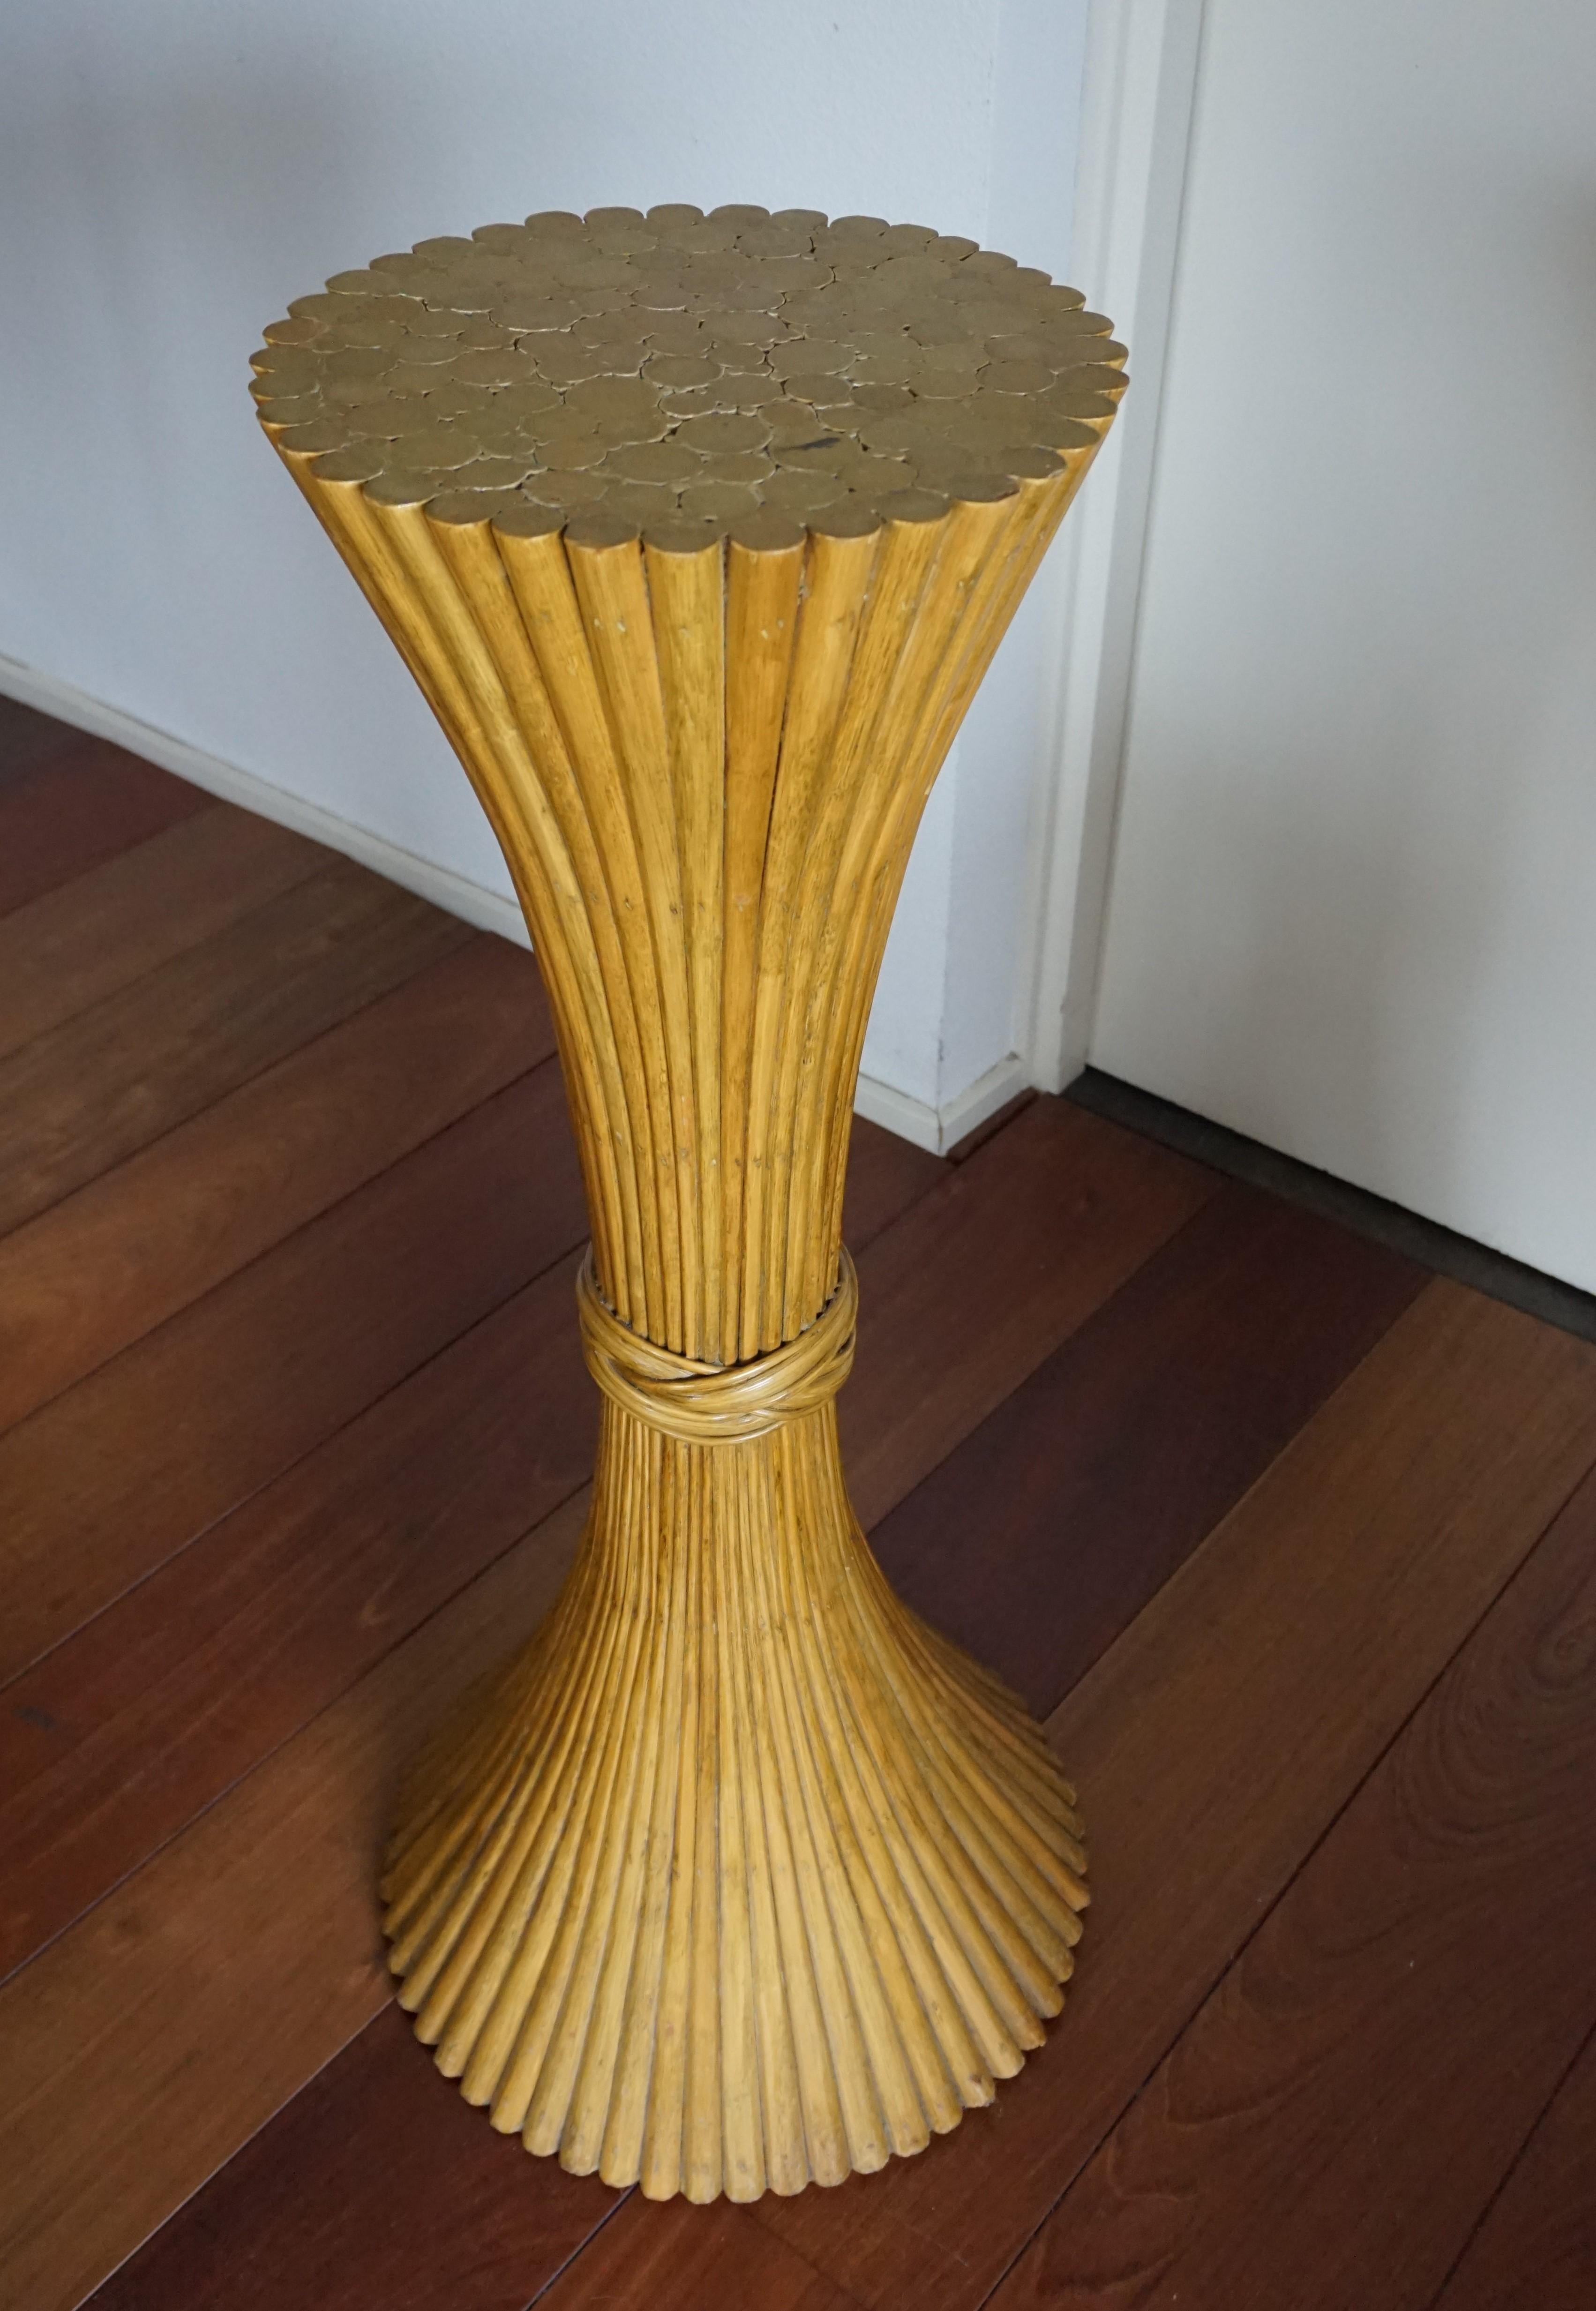 American Rare Midcentury Made McGuire Sheaf of Wheat Rattan Floor Pedestal Display Stand